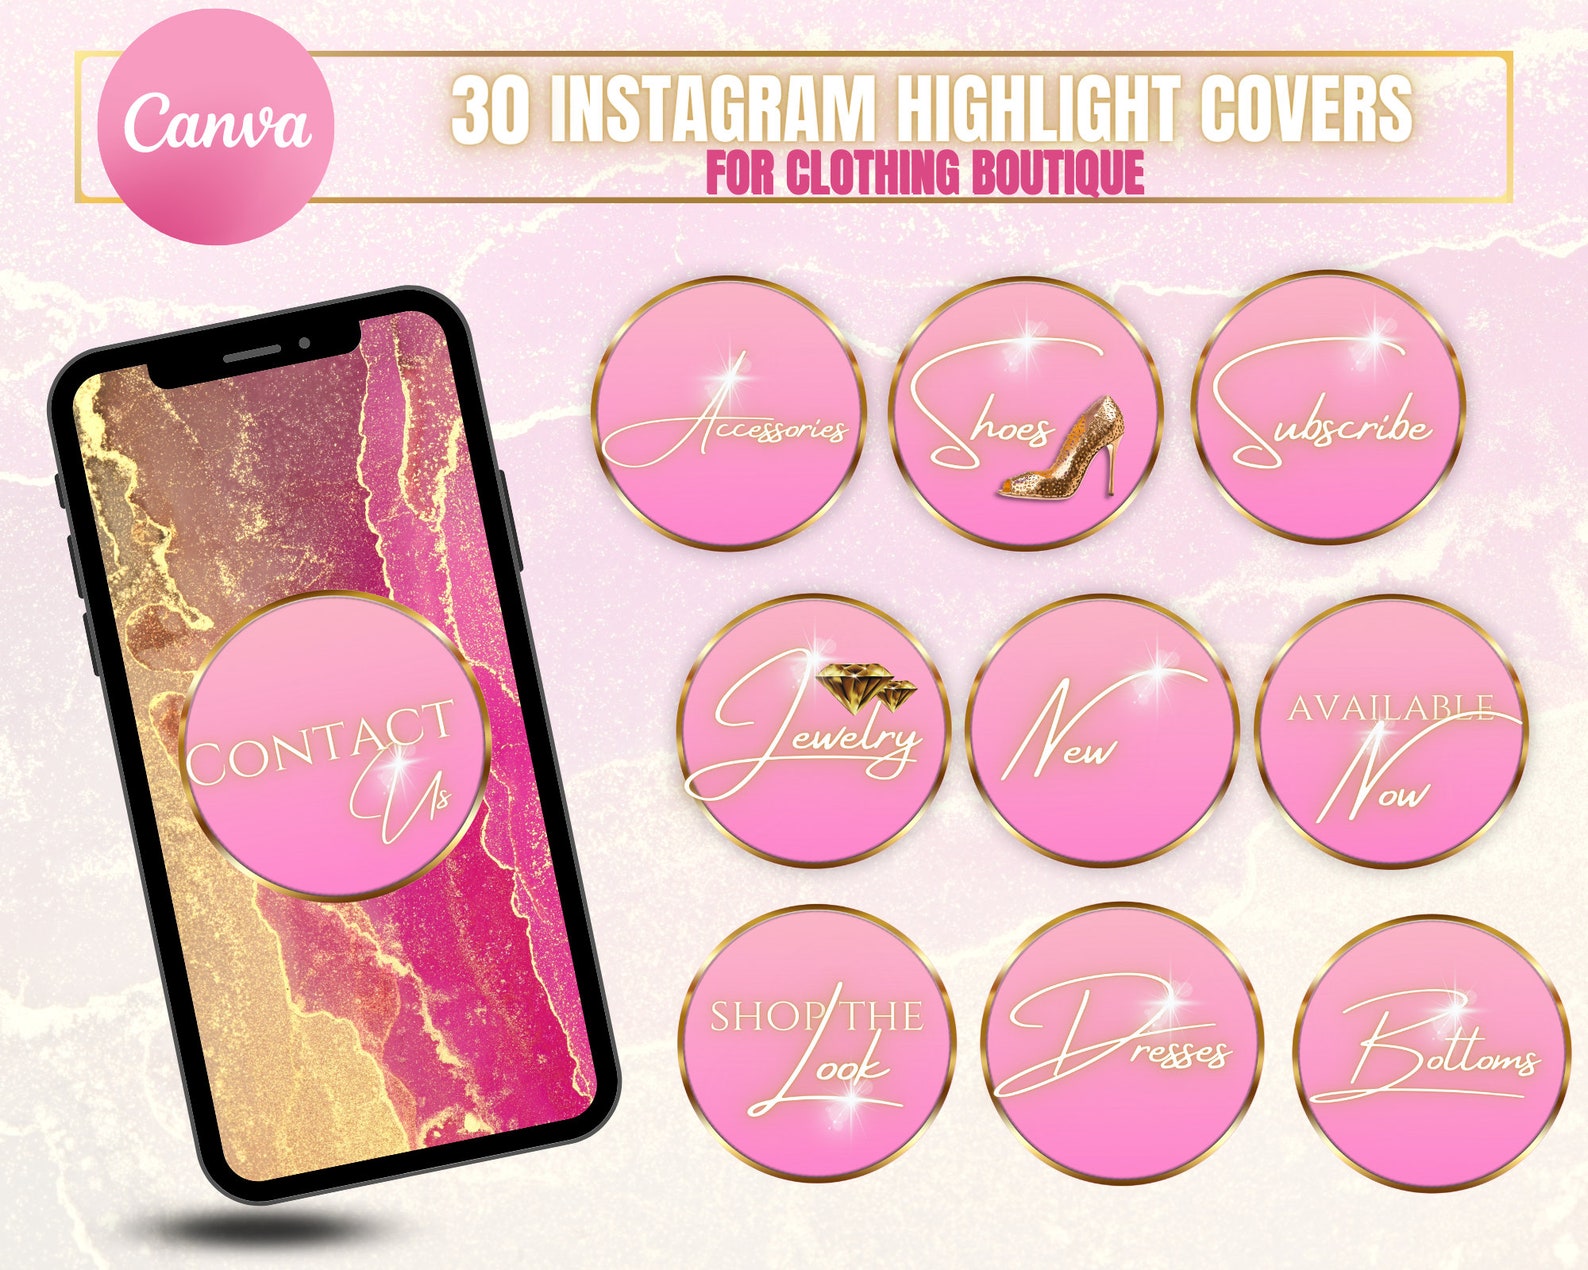 Instagram Highlight Covers for Clothing Boutique Business - Etsy